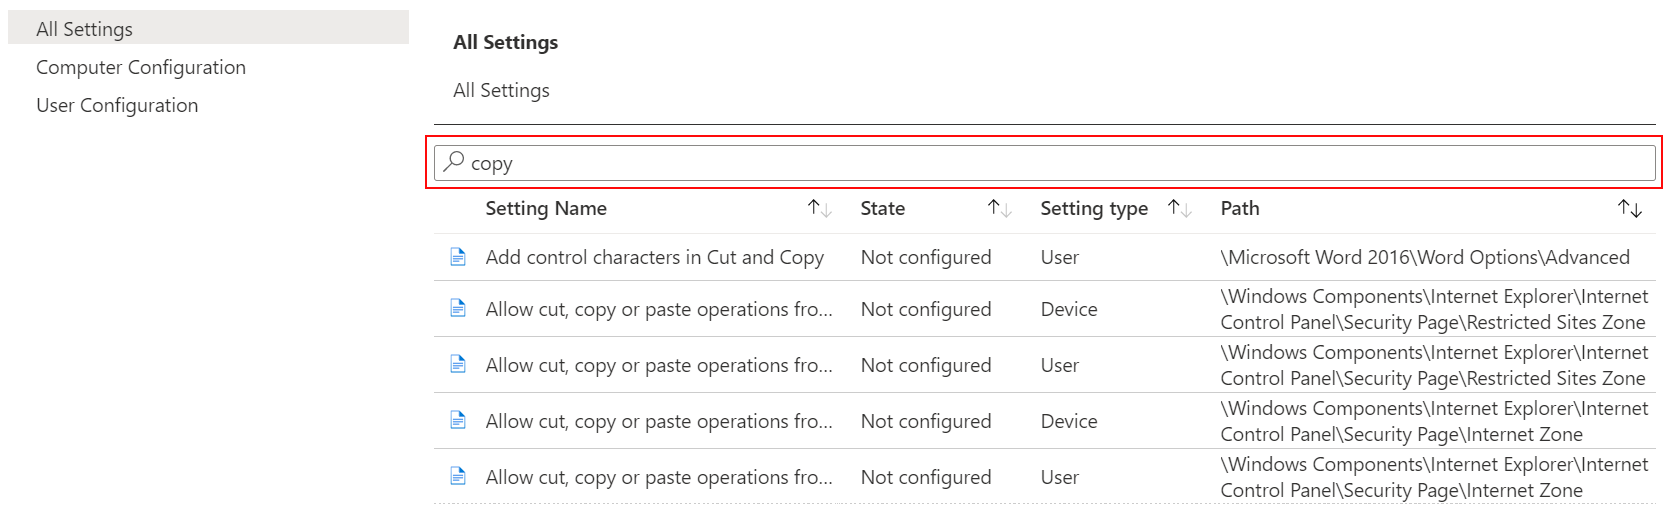 Search for copy to show all the device settings in administrative templates in Microsoft Intune and Endpoint Manager admin center.